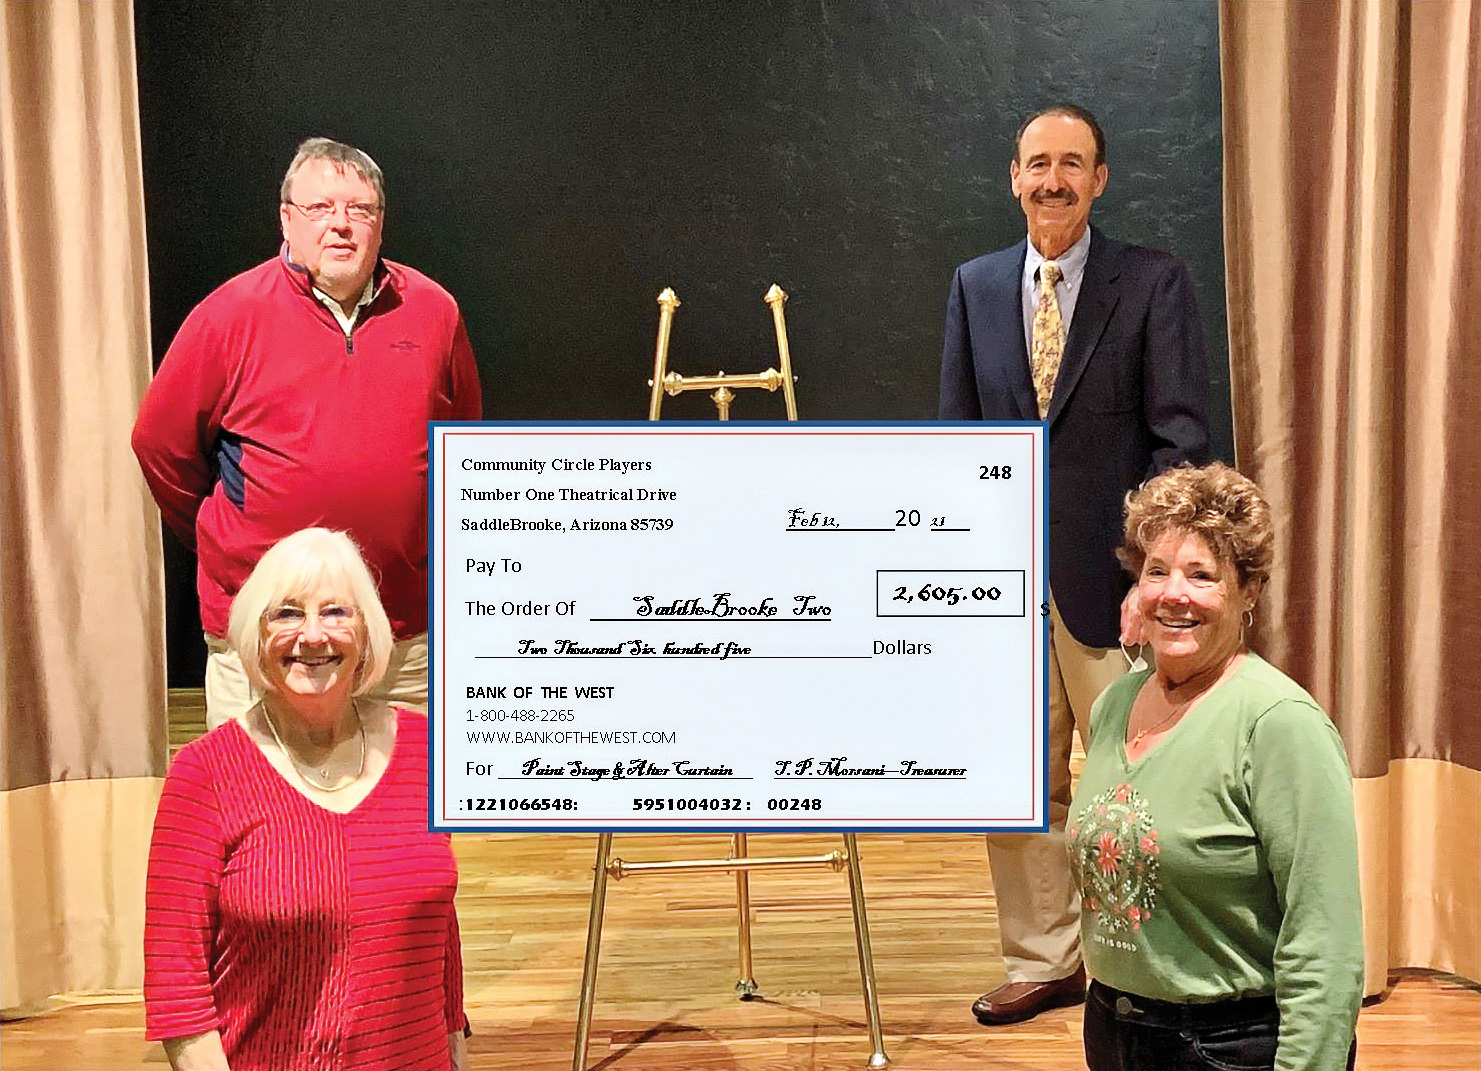 SaddleBrooke TWO Executive Director Damon Williams accepting a check from CCP’s CFO Tim Morsani and CCP co-founders Shawne Cryderman and Susan Sterling.